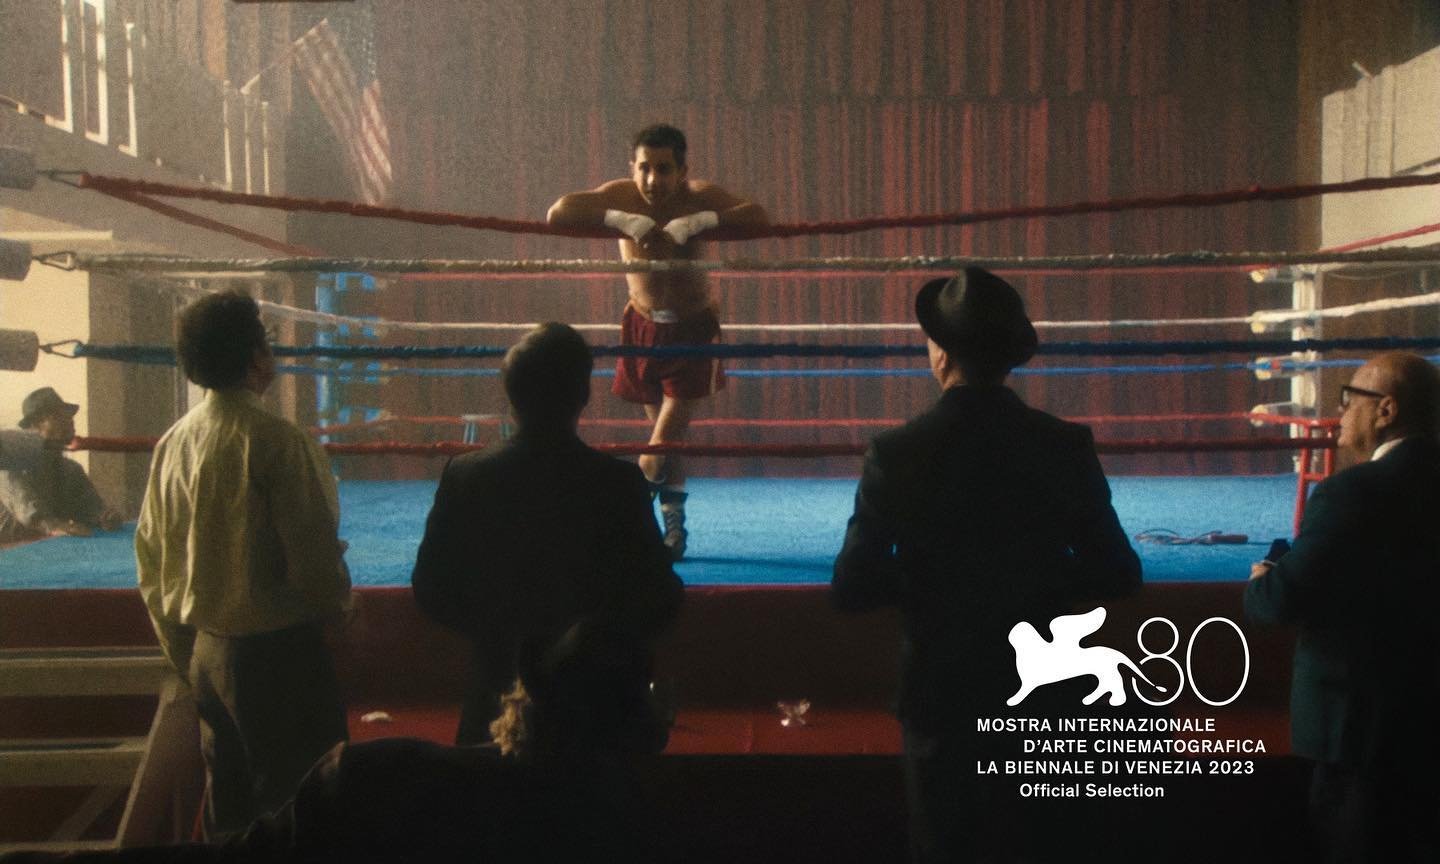 Woke up to wonderful news from @robertkolodny - The Featherweight, the feature film about boxing legend Willie Pep will premiere at the years @labiennale / Venice International Film Festival. 

Congratulations to Rob Kolodny, @steveloff @jamesmadio @